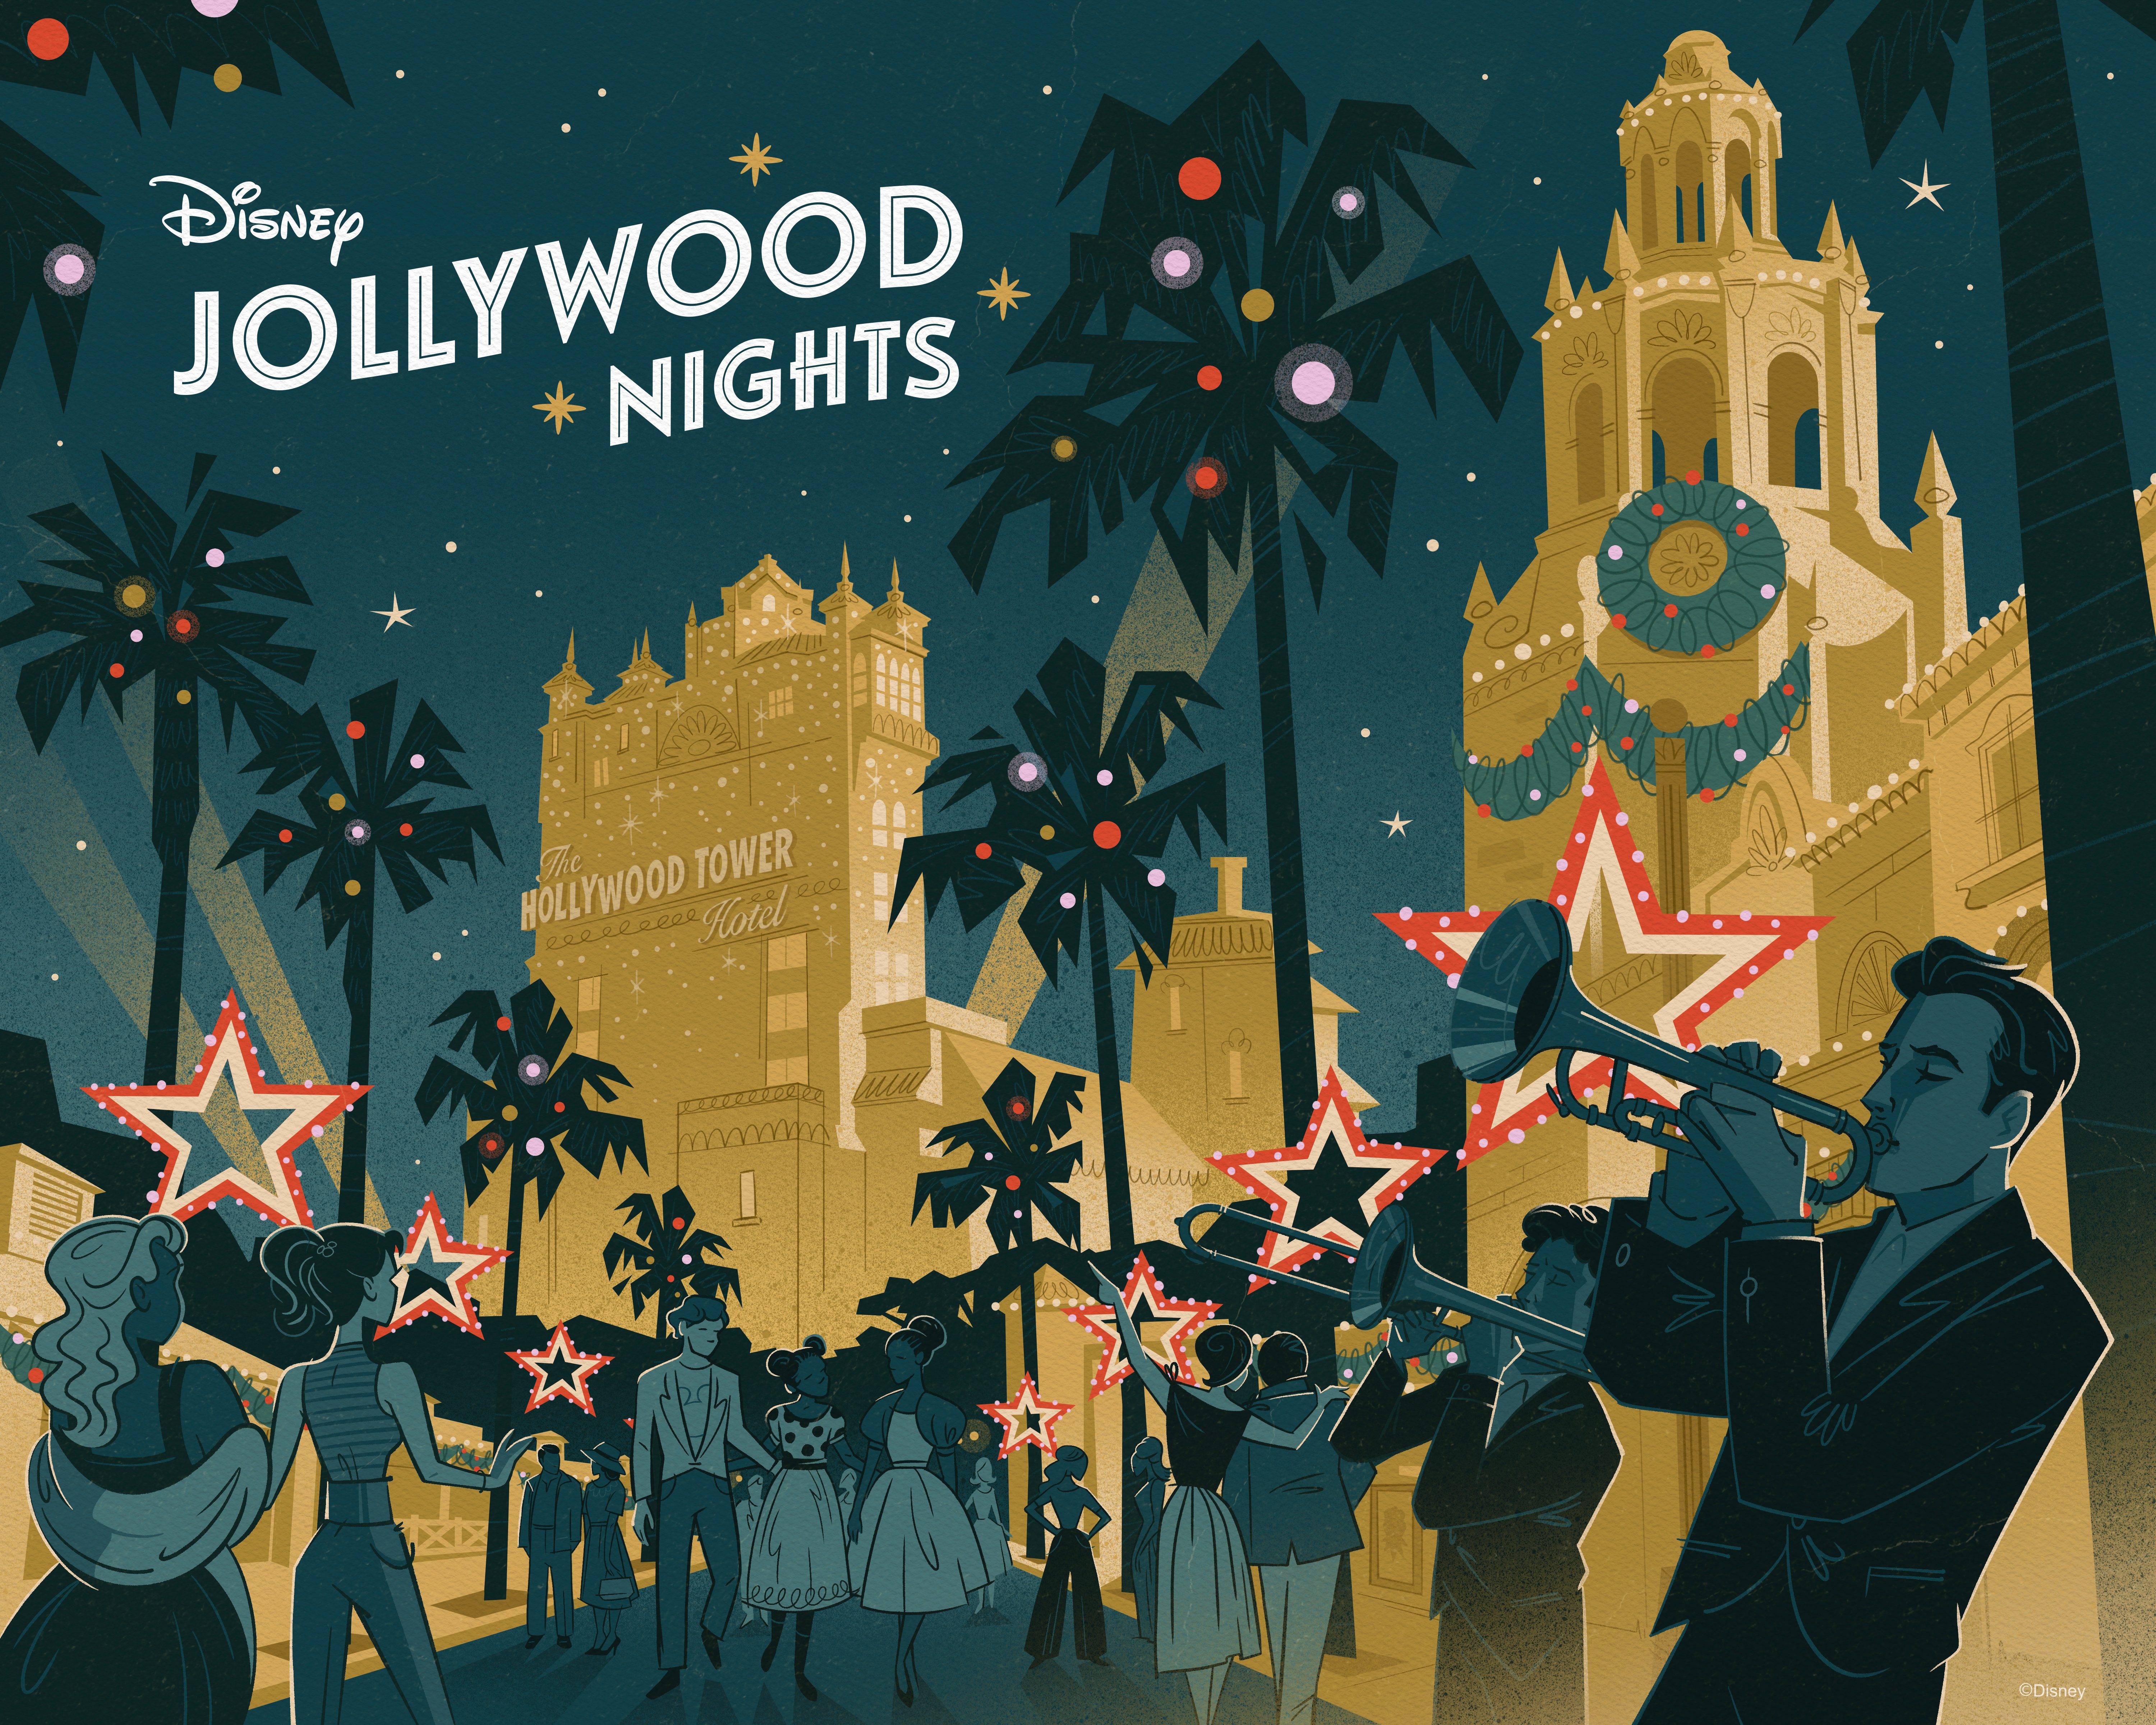 Hollywood Nights Photo Gallery